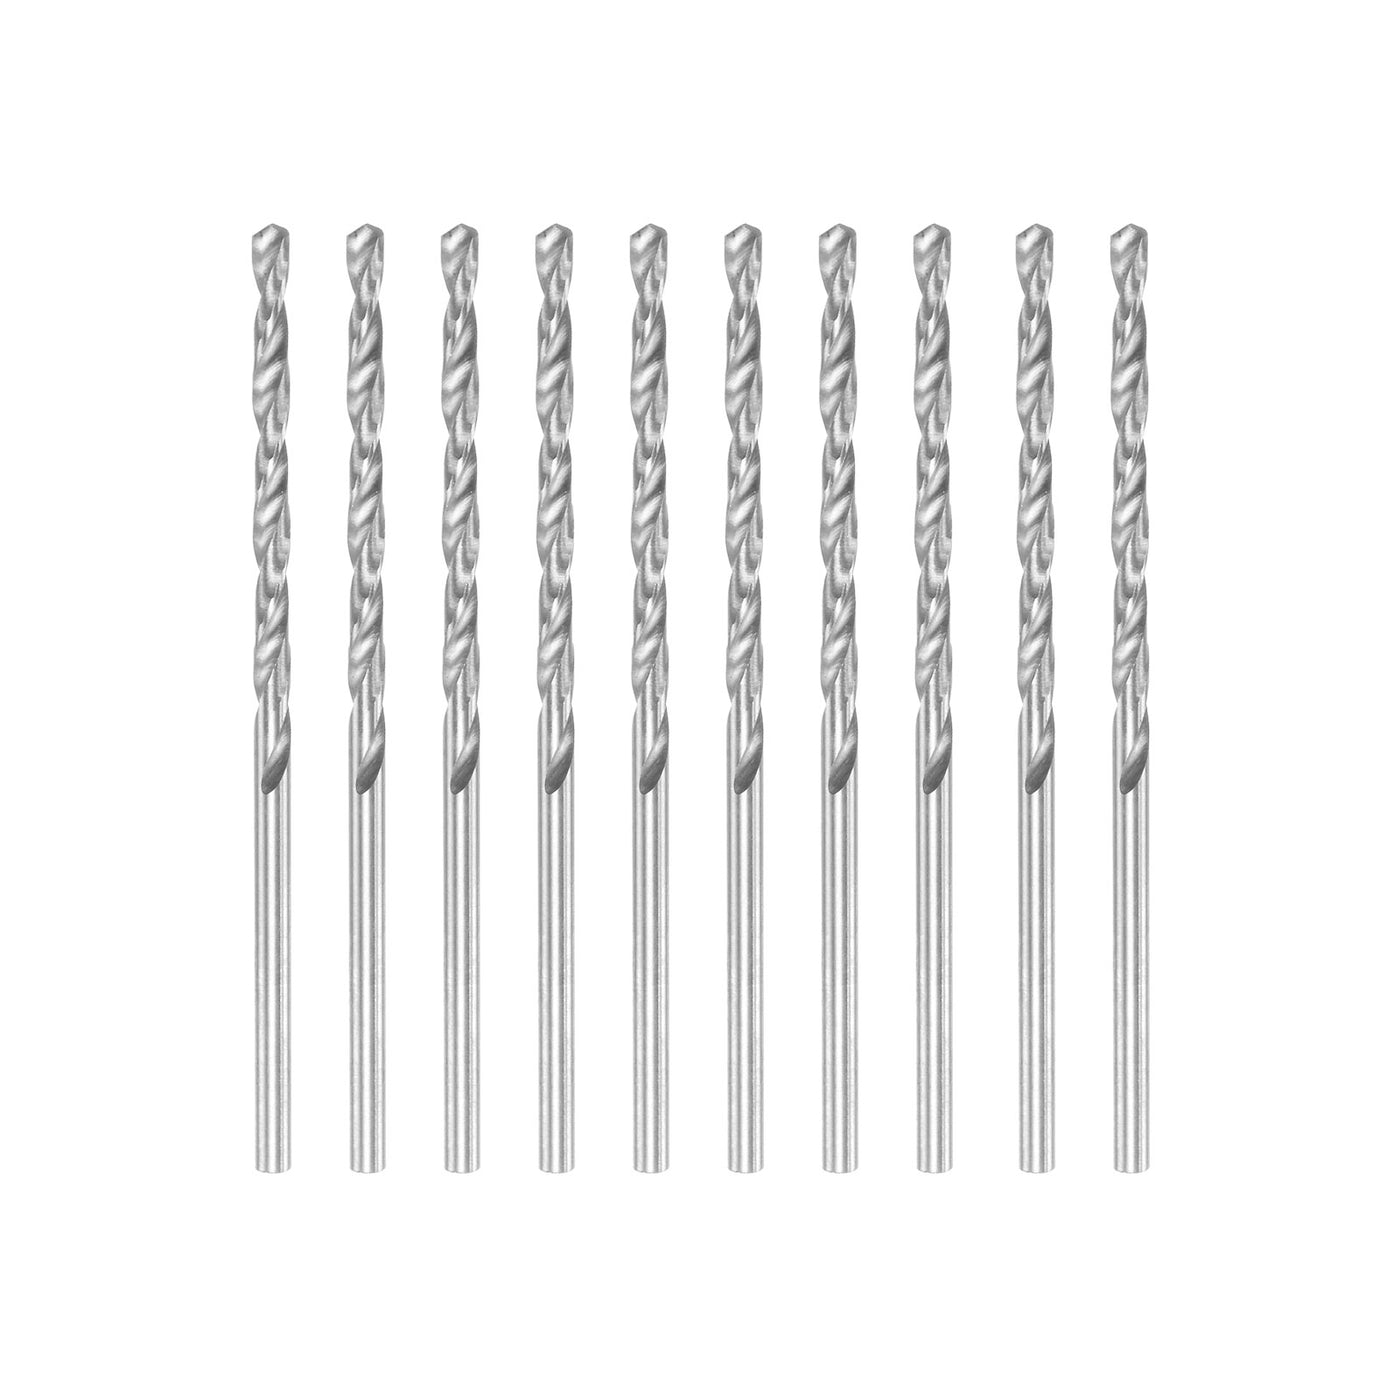 uxcell Uxcell 10 Pcs 1.85mm High Speed Steel Drill Bits, Fully Ground 48mm Length Drill Bit